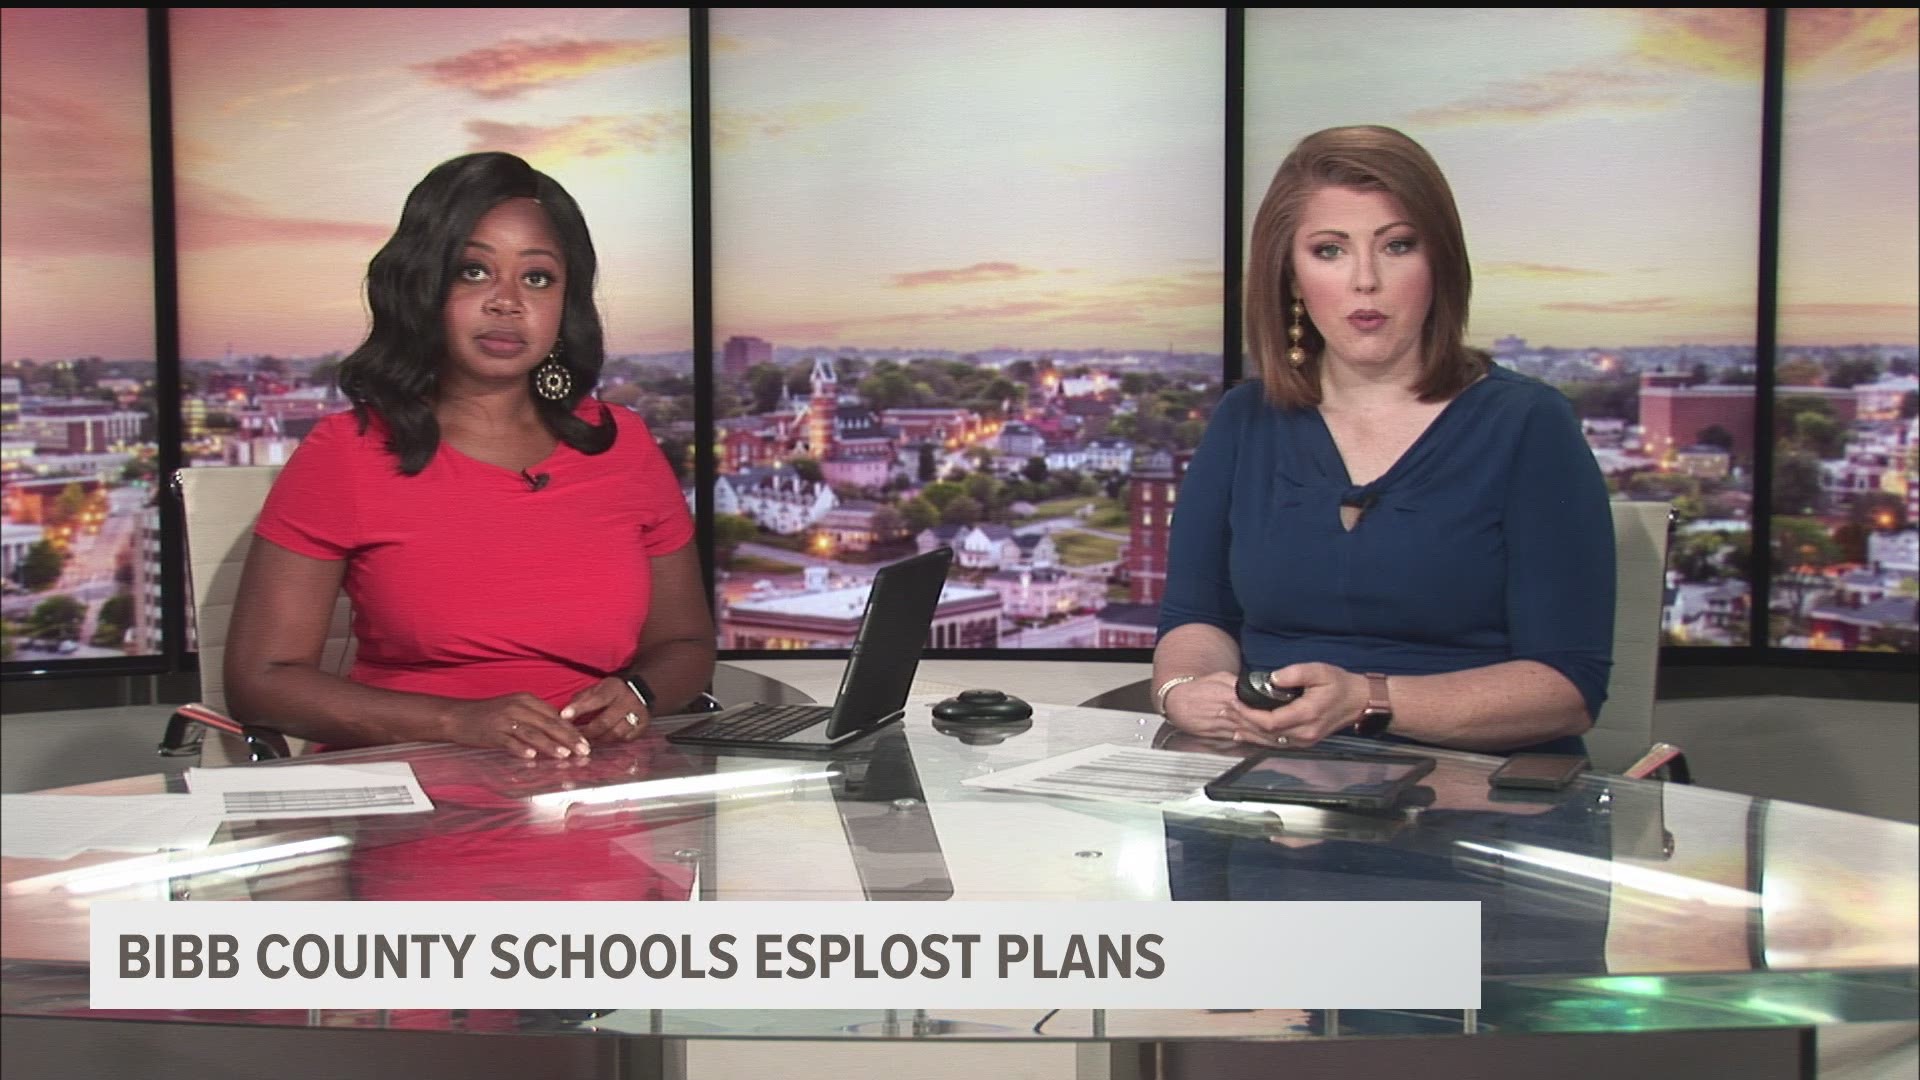 If voters approve to continue an ESPLOST for Bibb County Schools in November, the district plans to start some major projects with the money.